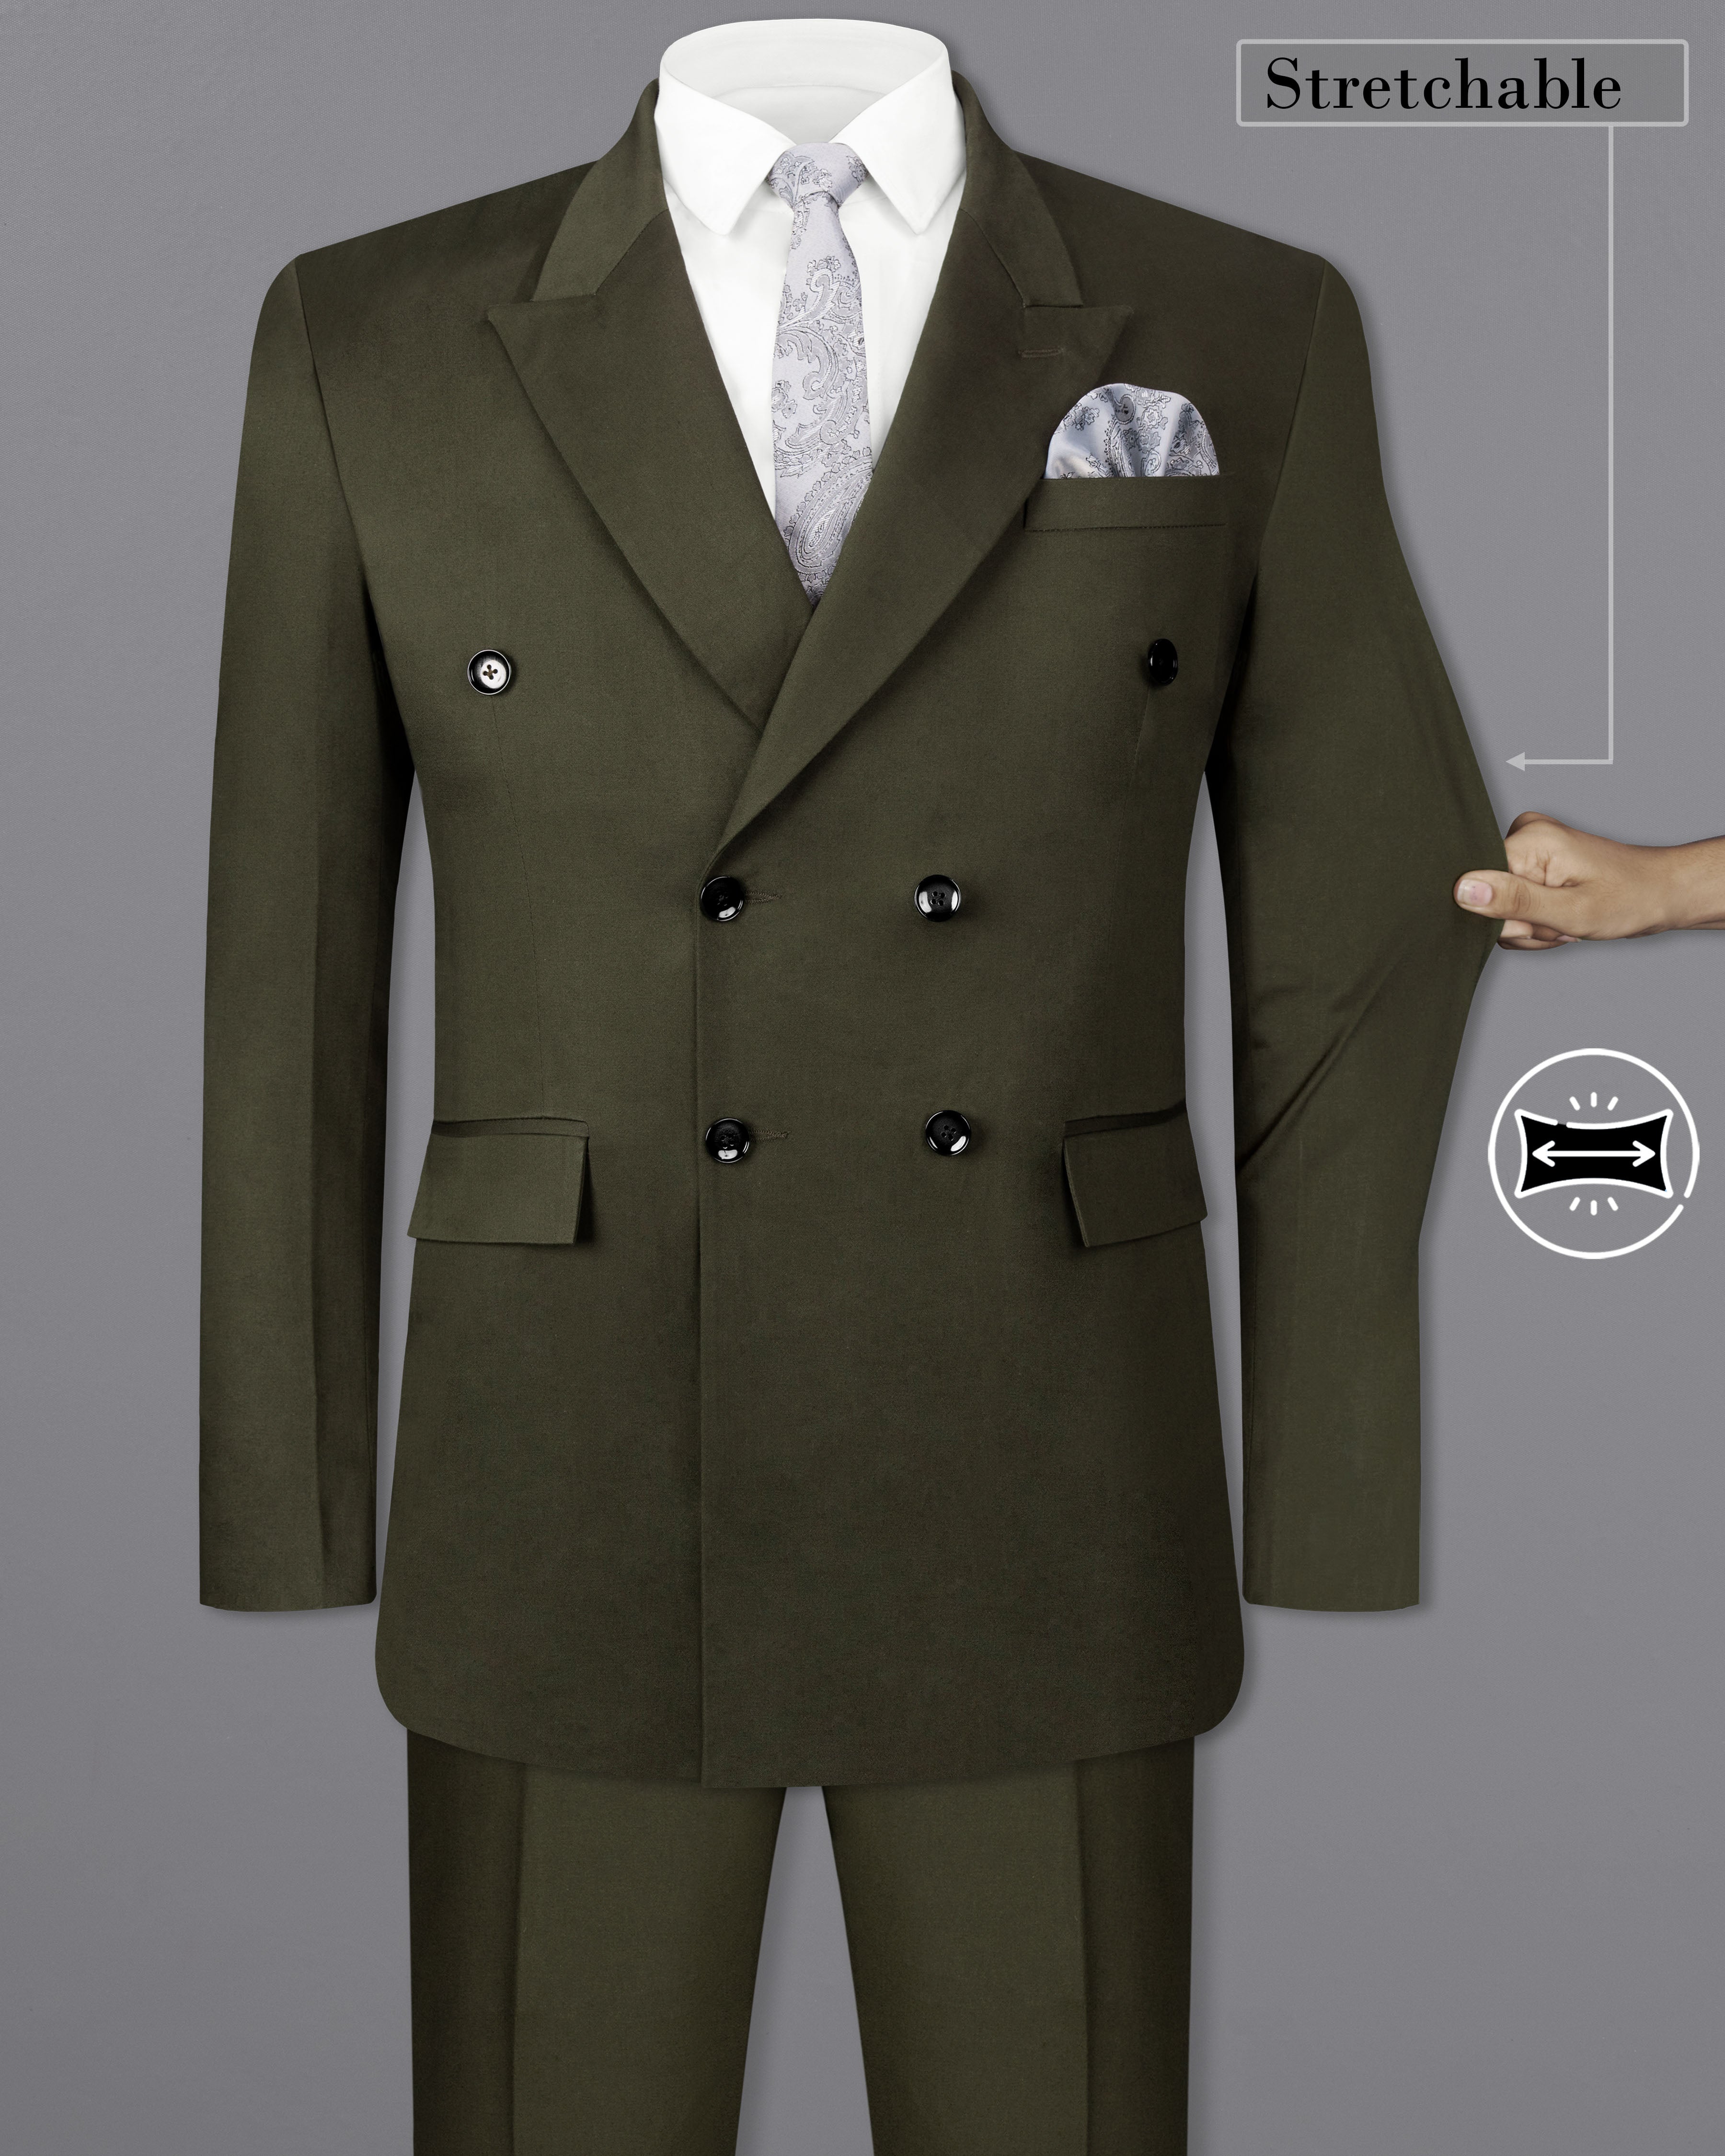 Taupe Green Solid Stretchable Premium Cotton Double Breasted Traveler Suit ST2643-DB-36, ST2643-DB-38, ST2643-DB-40, ST2643-DB-42, ST2643-DB-44, ST2643-DB-46, ST2643-DB-48, ST2643-DB-50, ST2643-DB-52, ST2643-DB-54, ST2643-DB-56, ST2643-DB-58, ST2643-DB-60